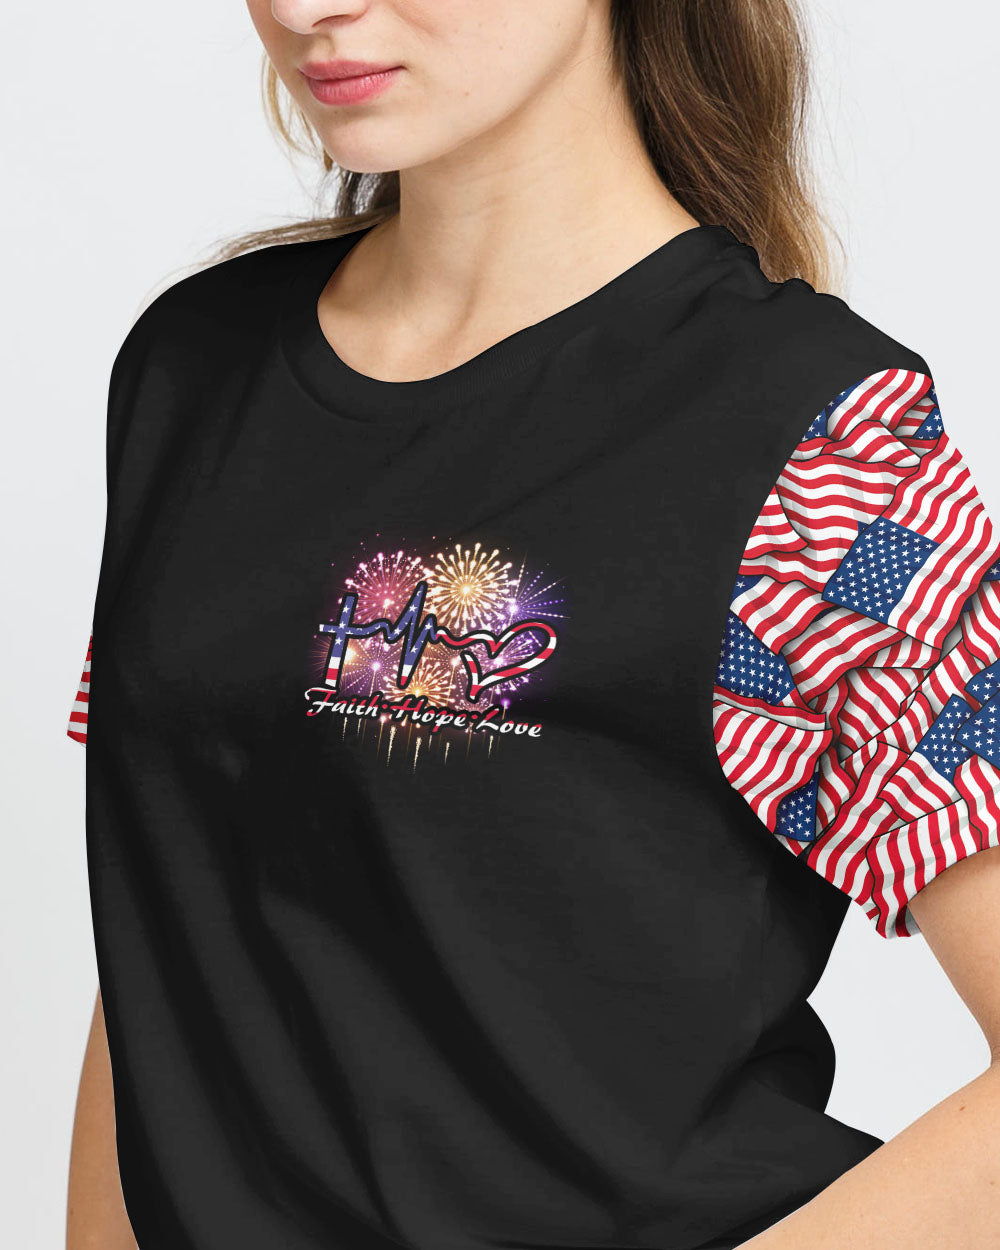 Red White And Blessed America Cross Independence Day Women's Christian Tshirt